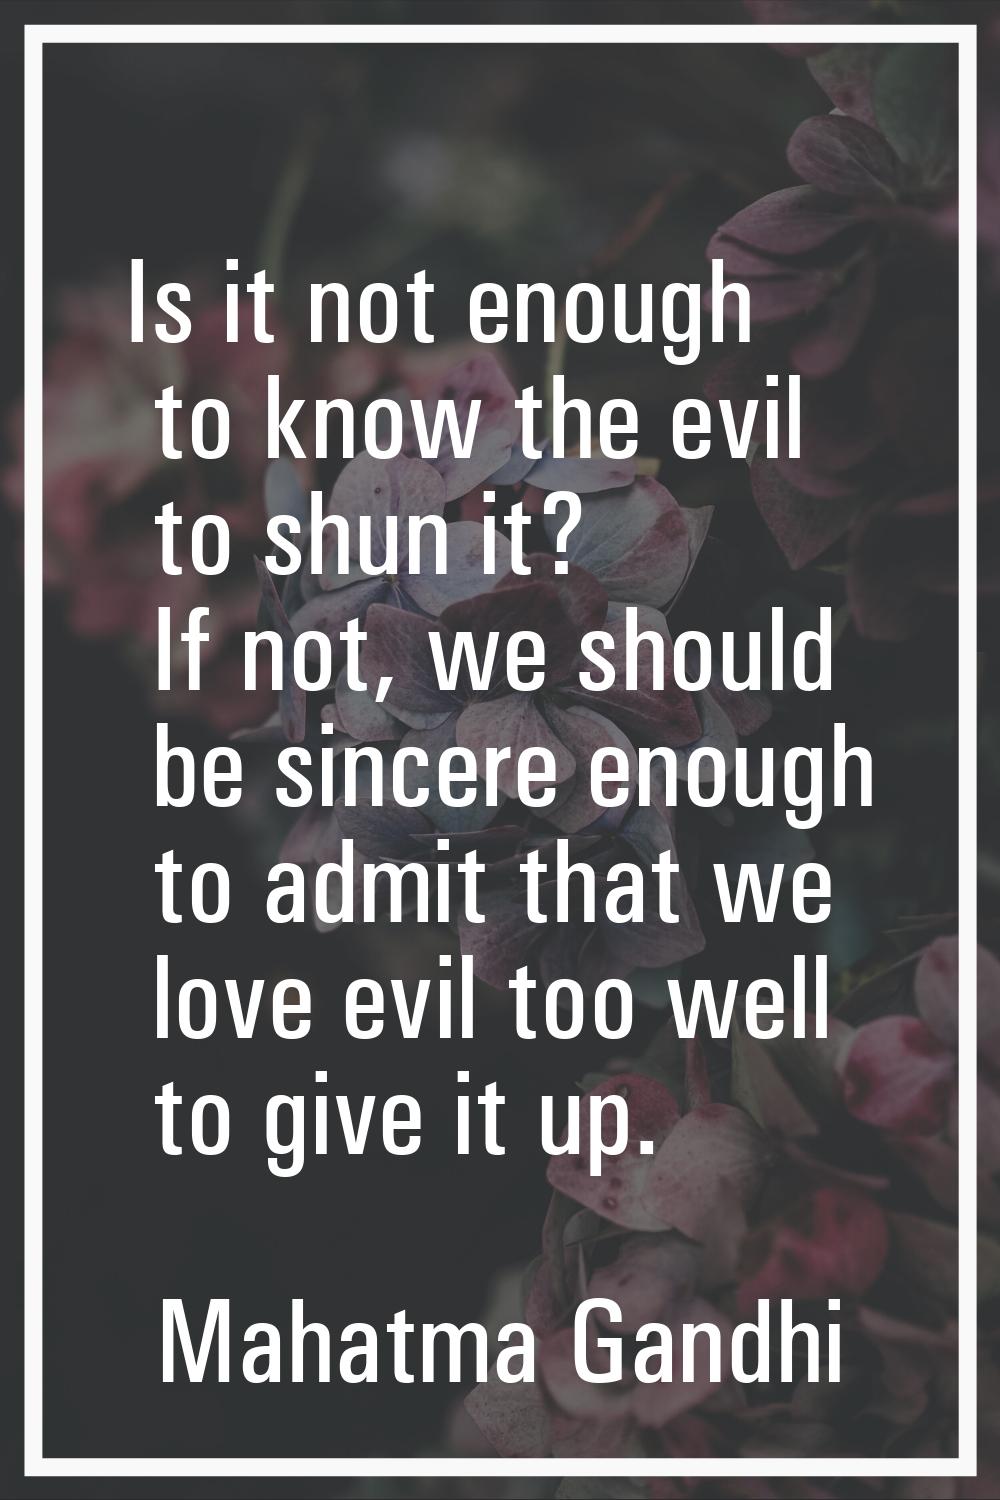 Is it not enough to know the evil to shun it? If not, we should be sincere enough to admit that we 